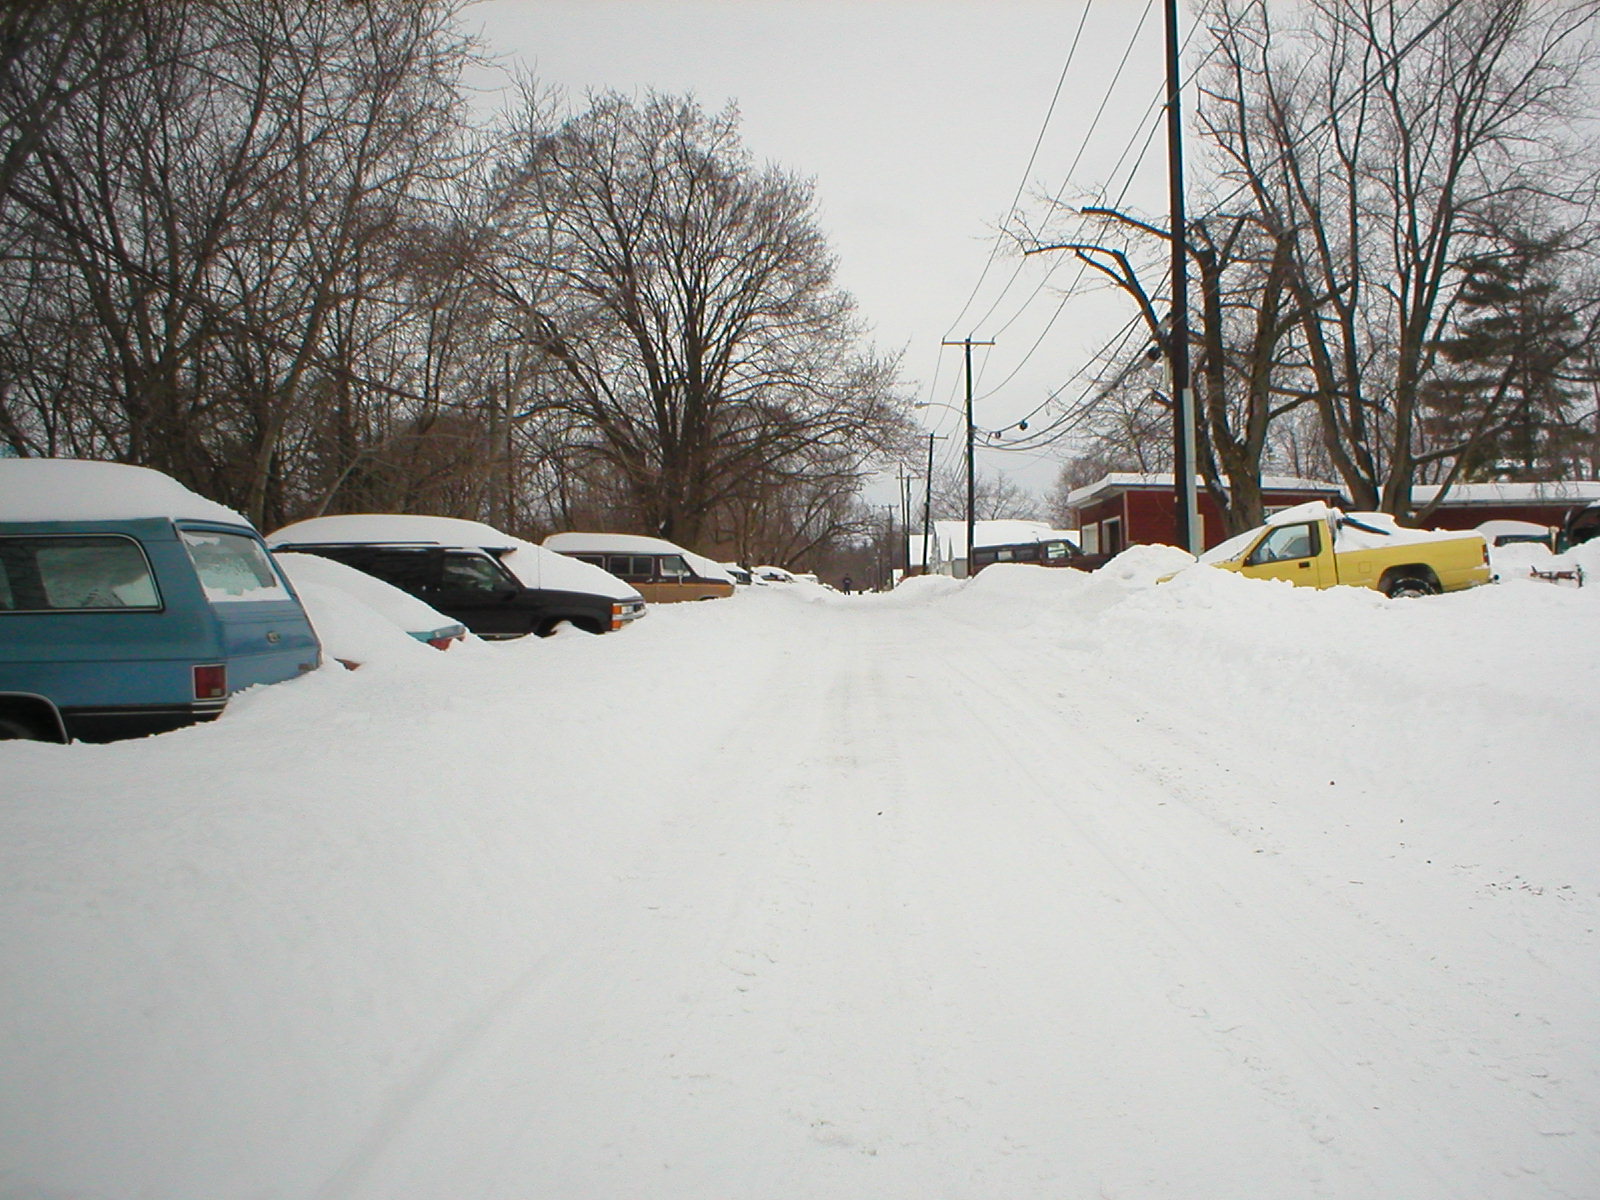 Here's a picture showing deep snow in an alley.